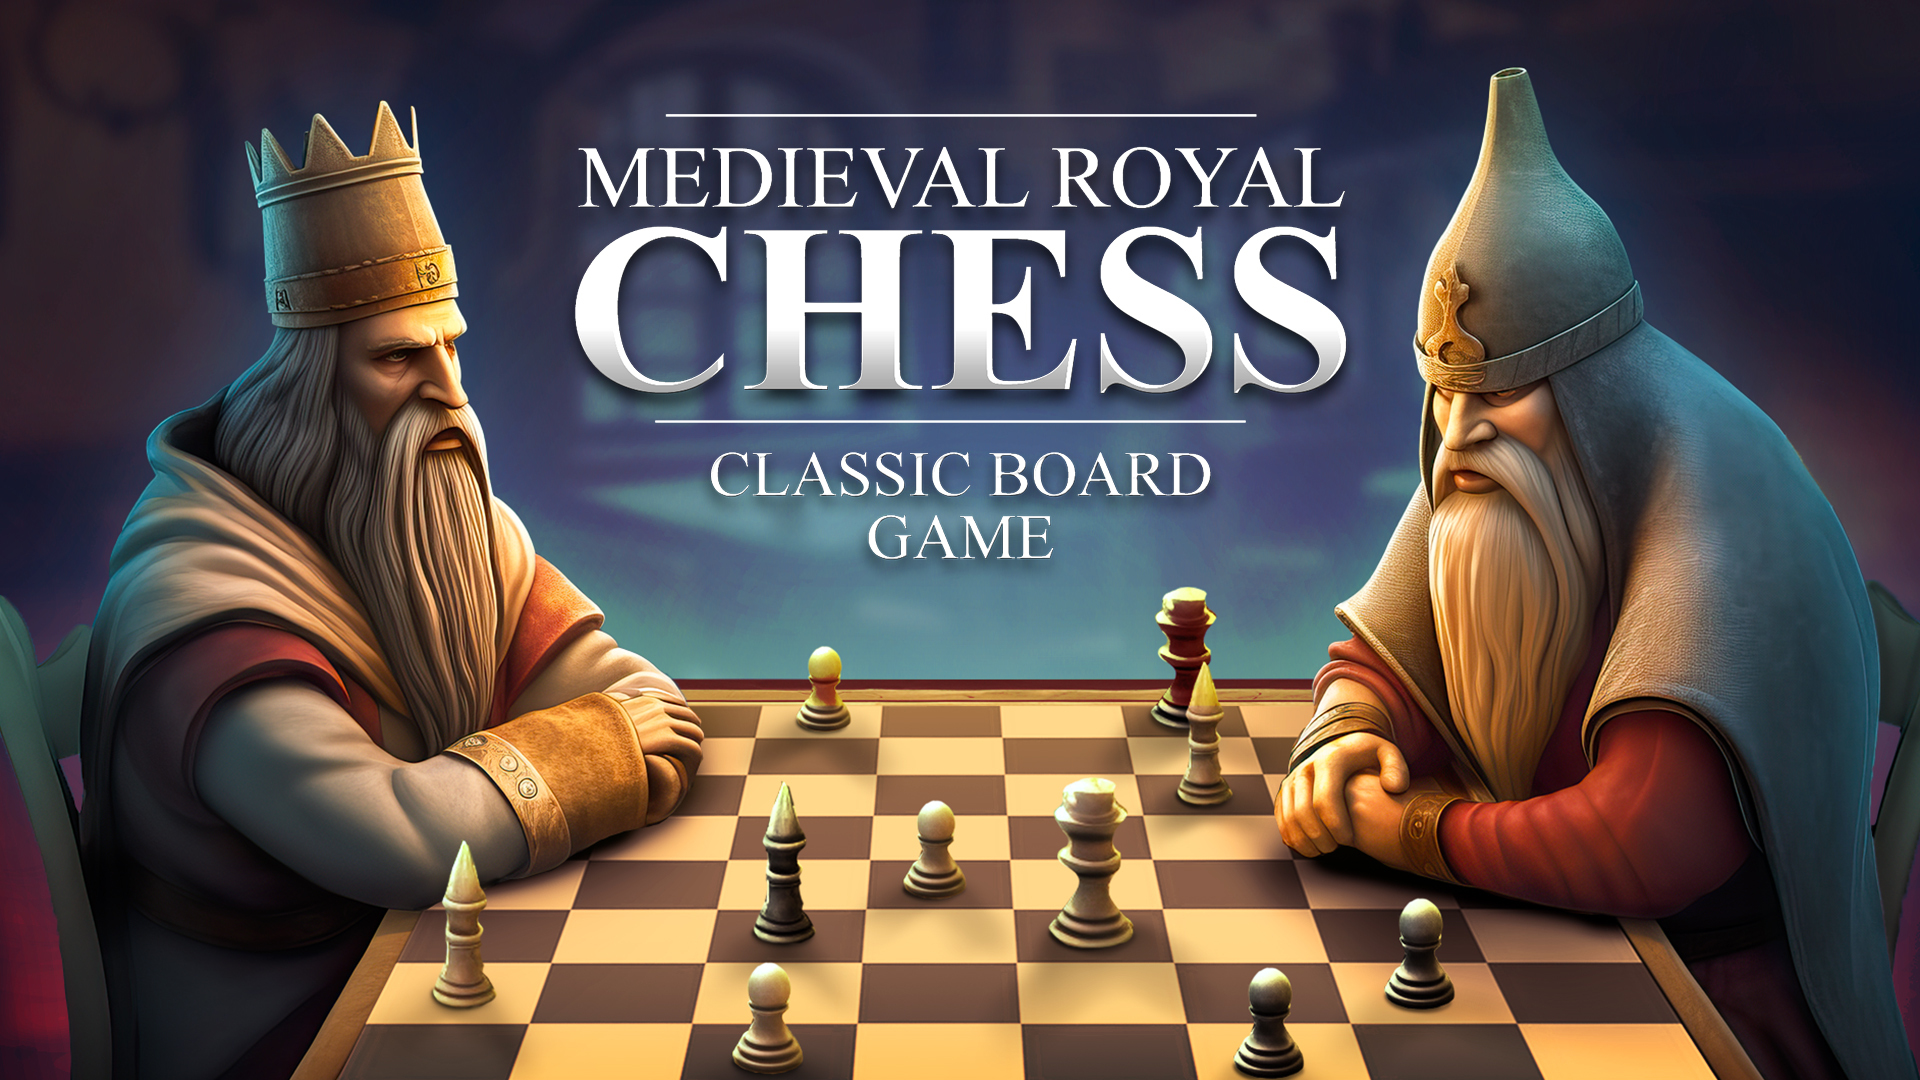 Medieval Royal Chess: Classic Board Game - Metacritic